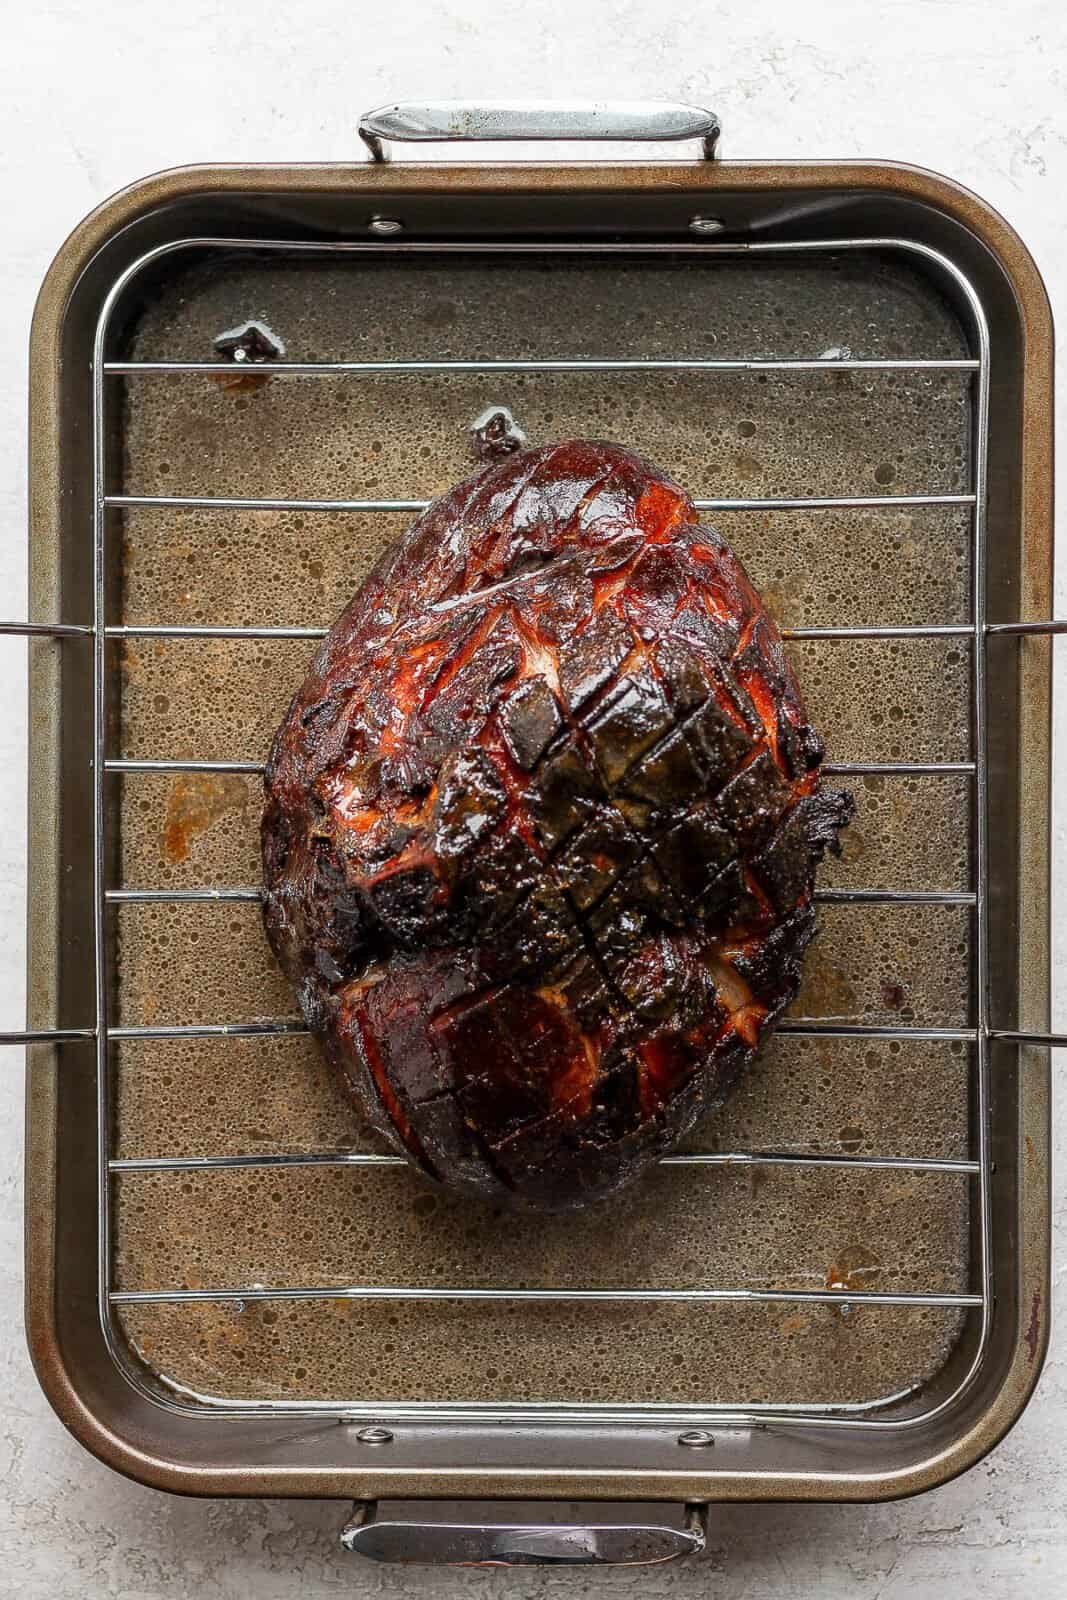 A cooked ham in a roaster.